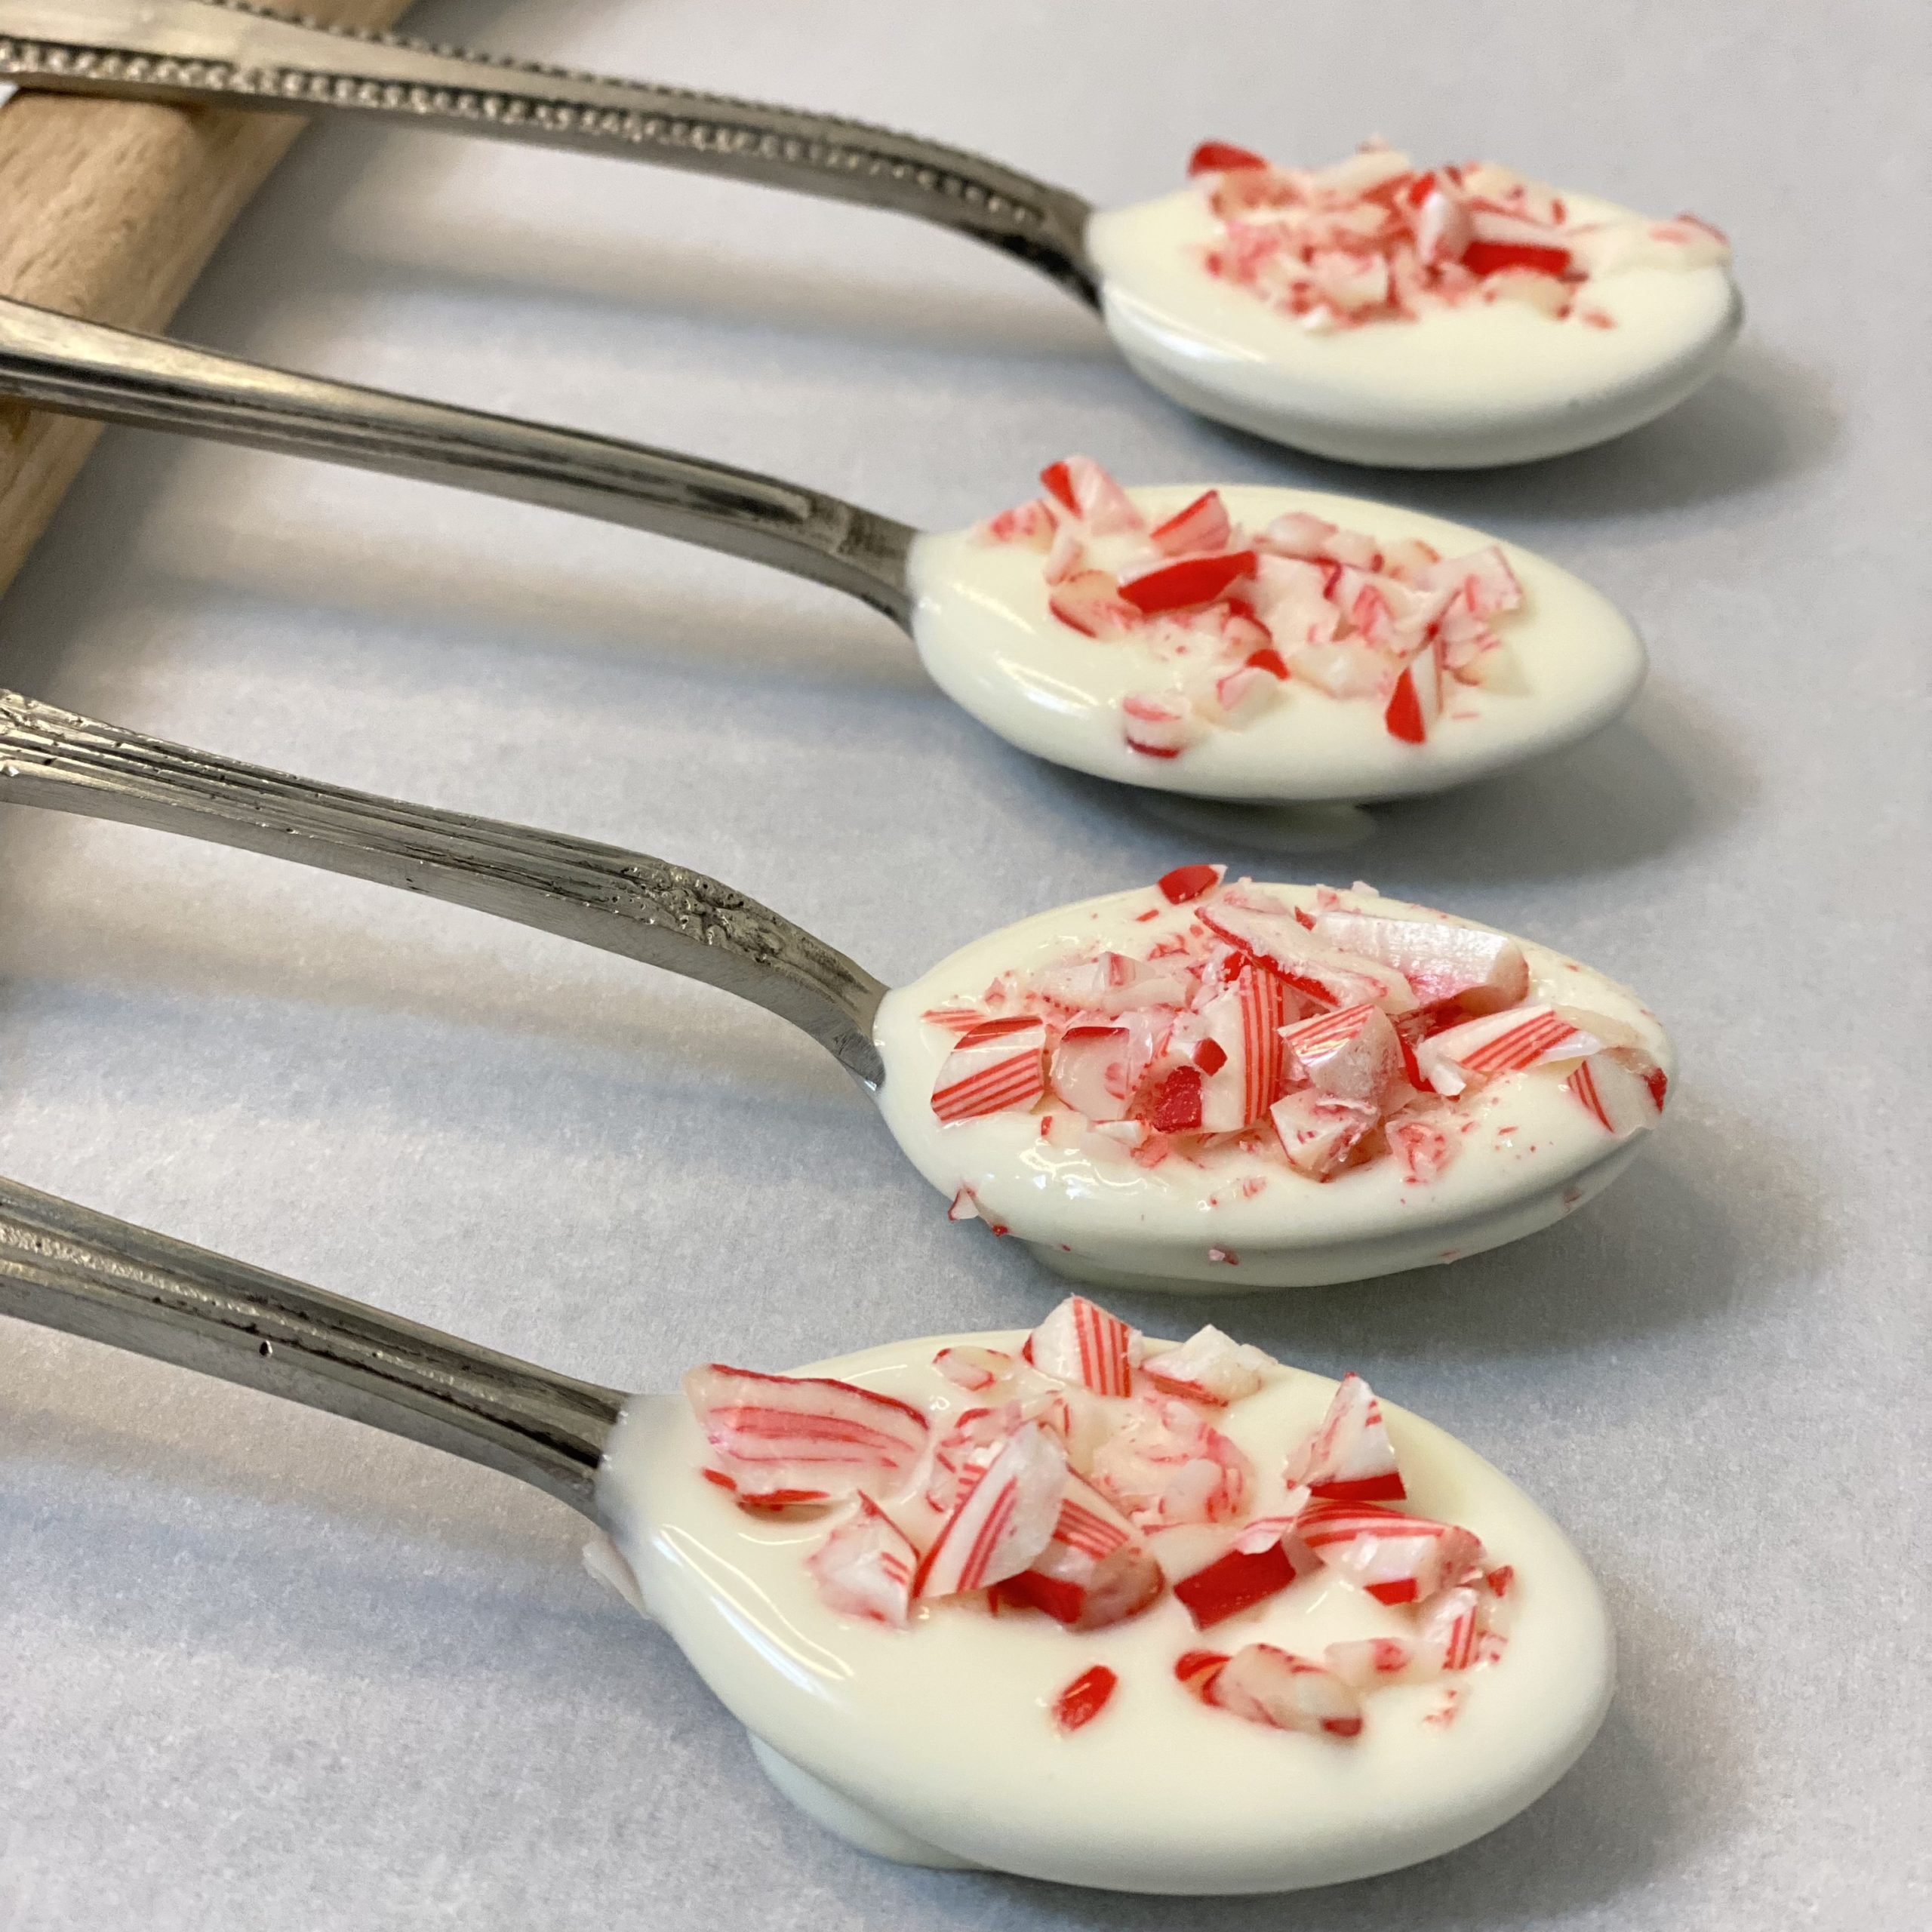 Spoons dipped in white chocolate and crushed candy cane sprinkled on the chocolate.